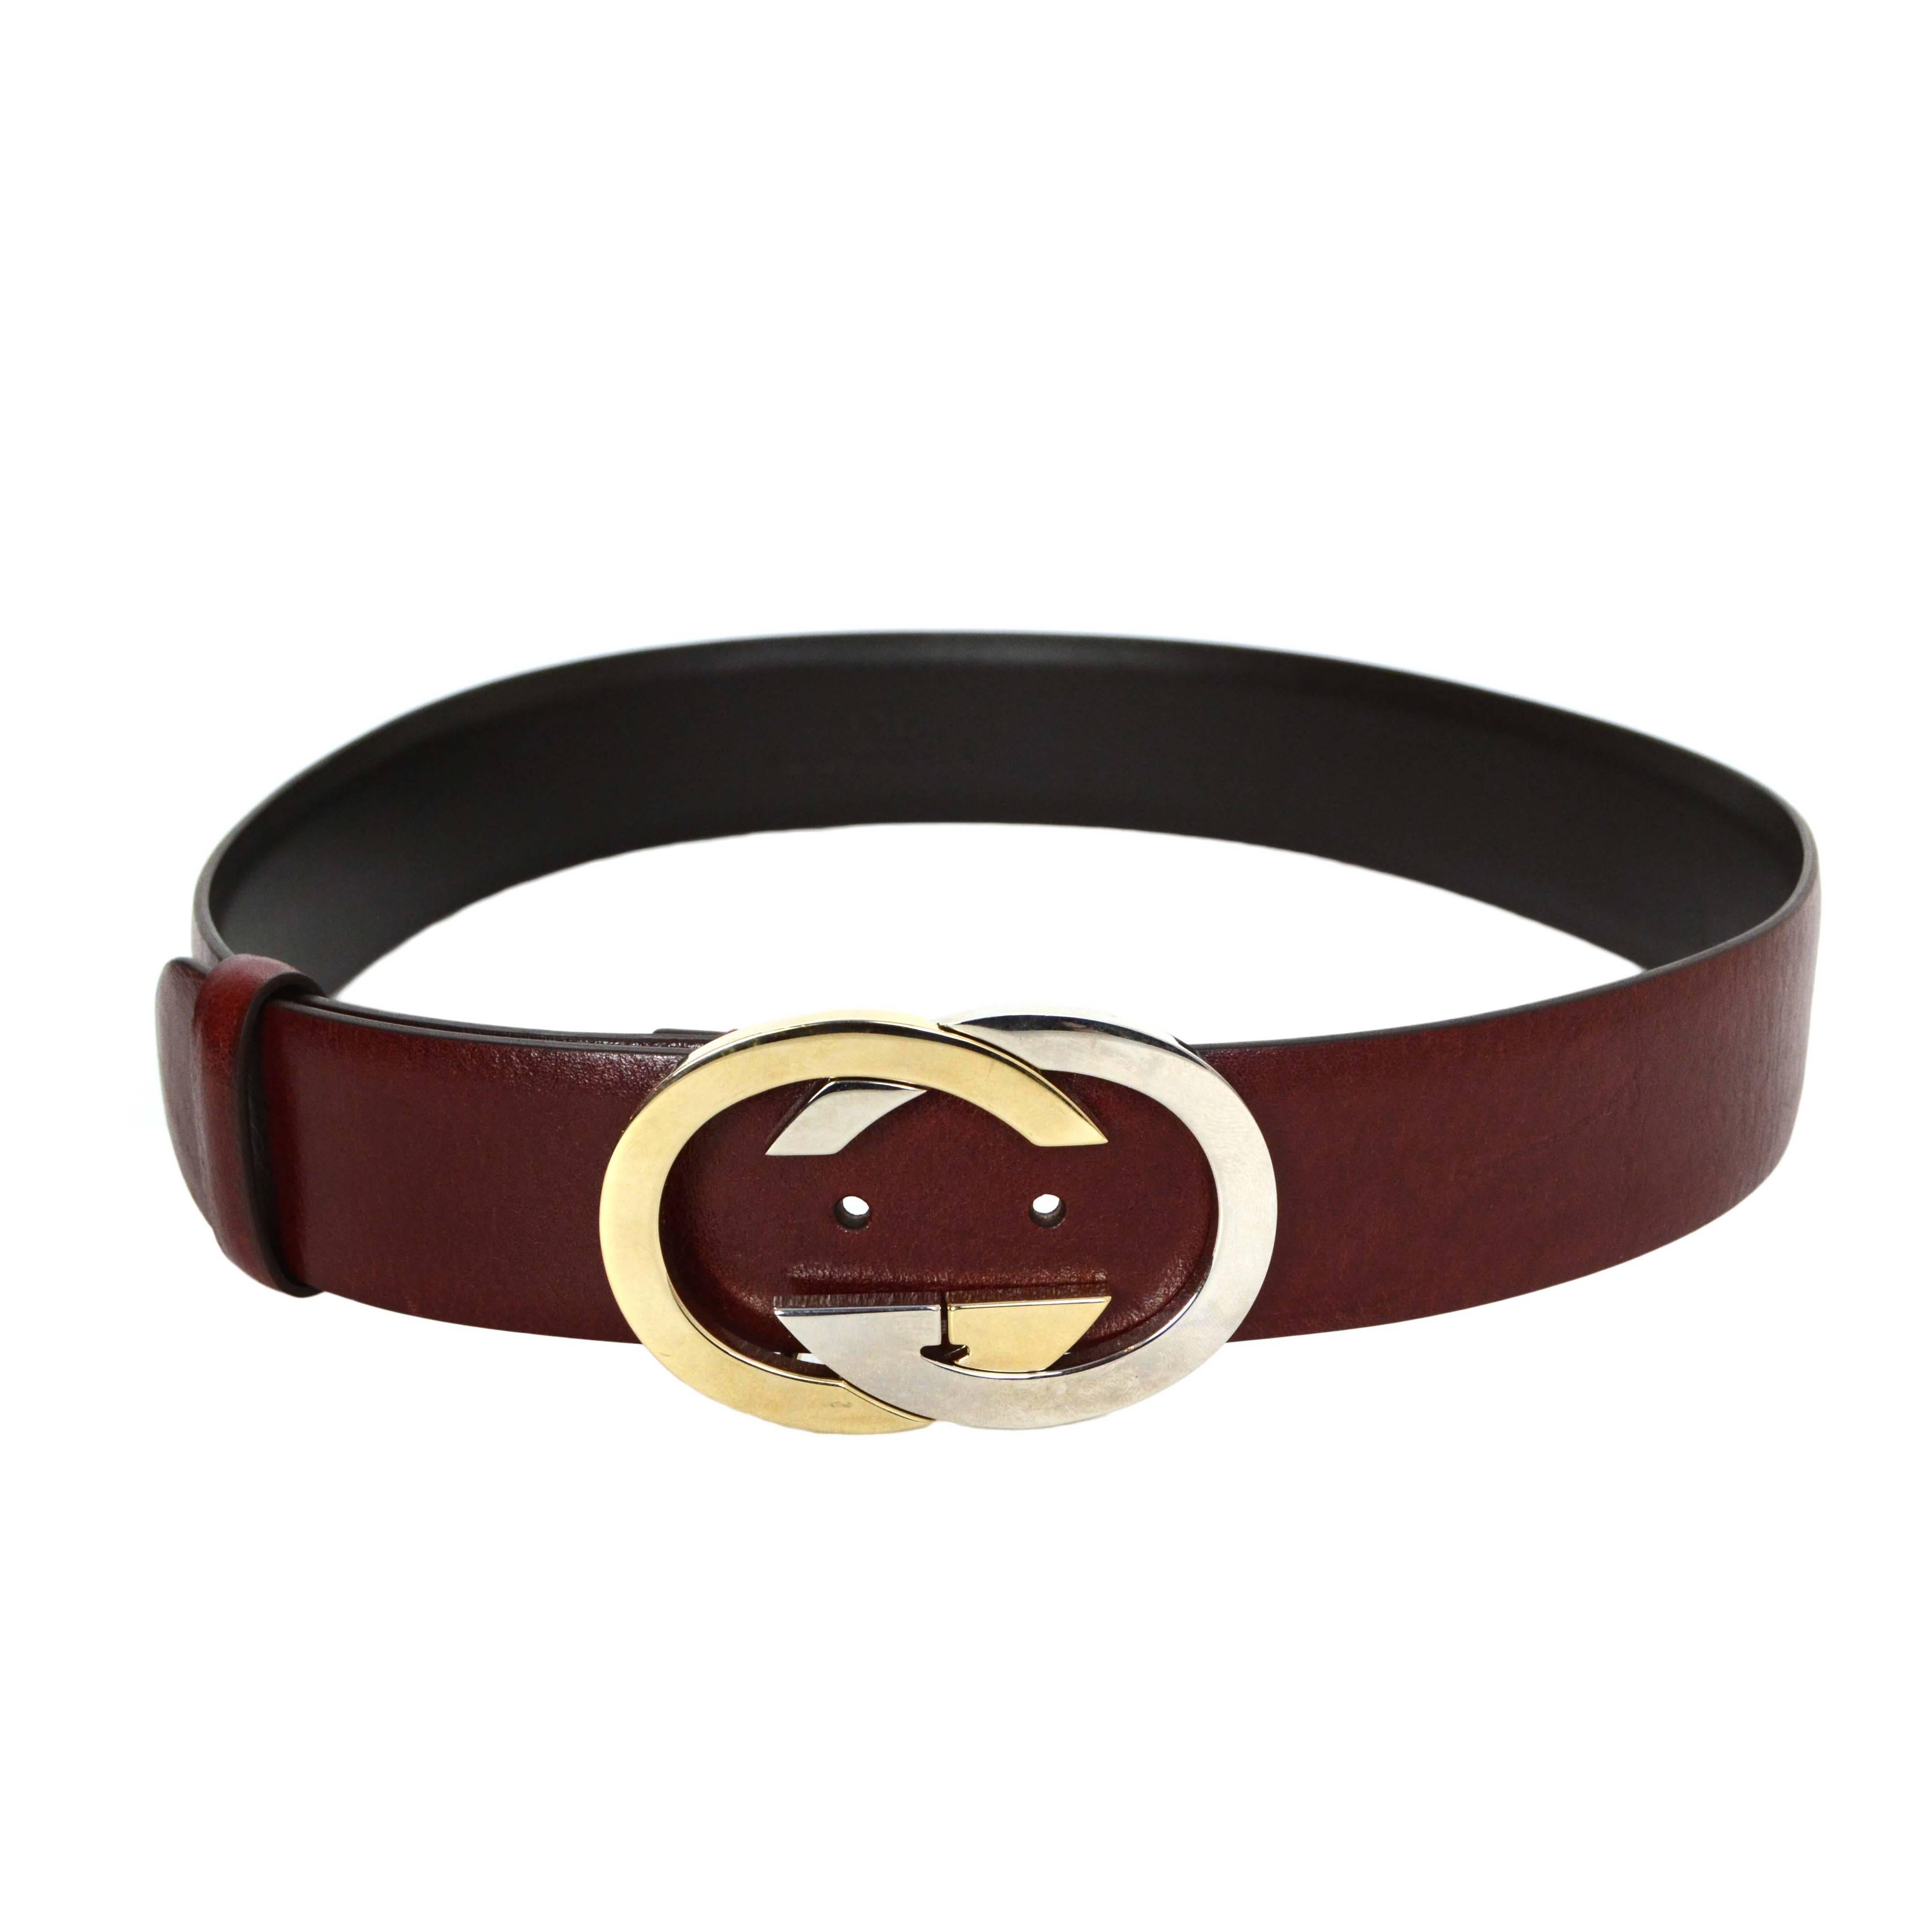 Gucci Burgundy Leather Belt With Two Tone Logo Buckle